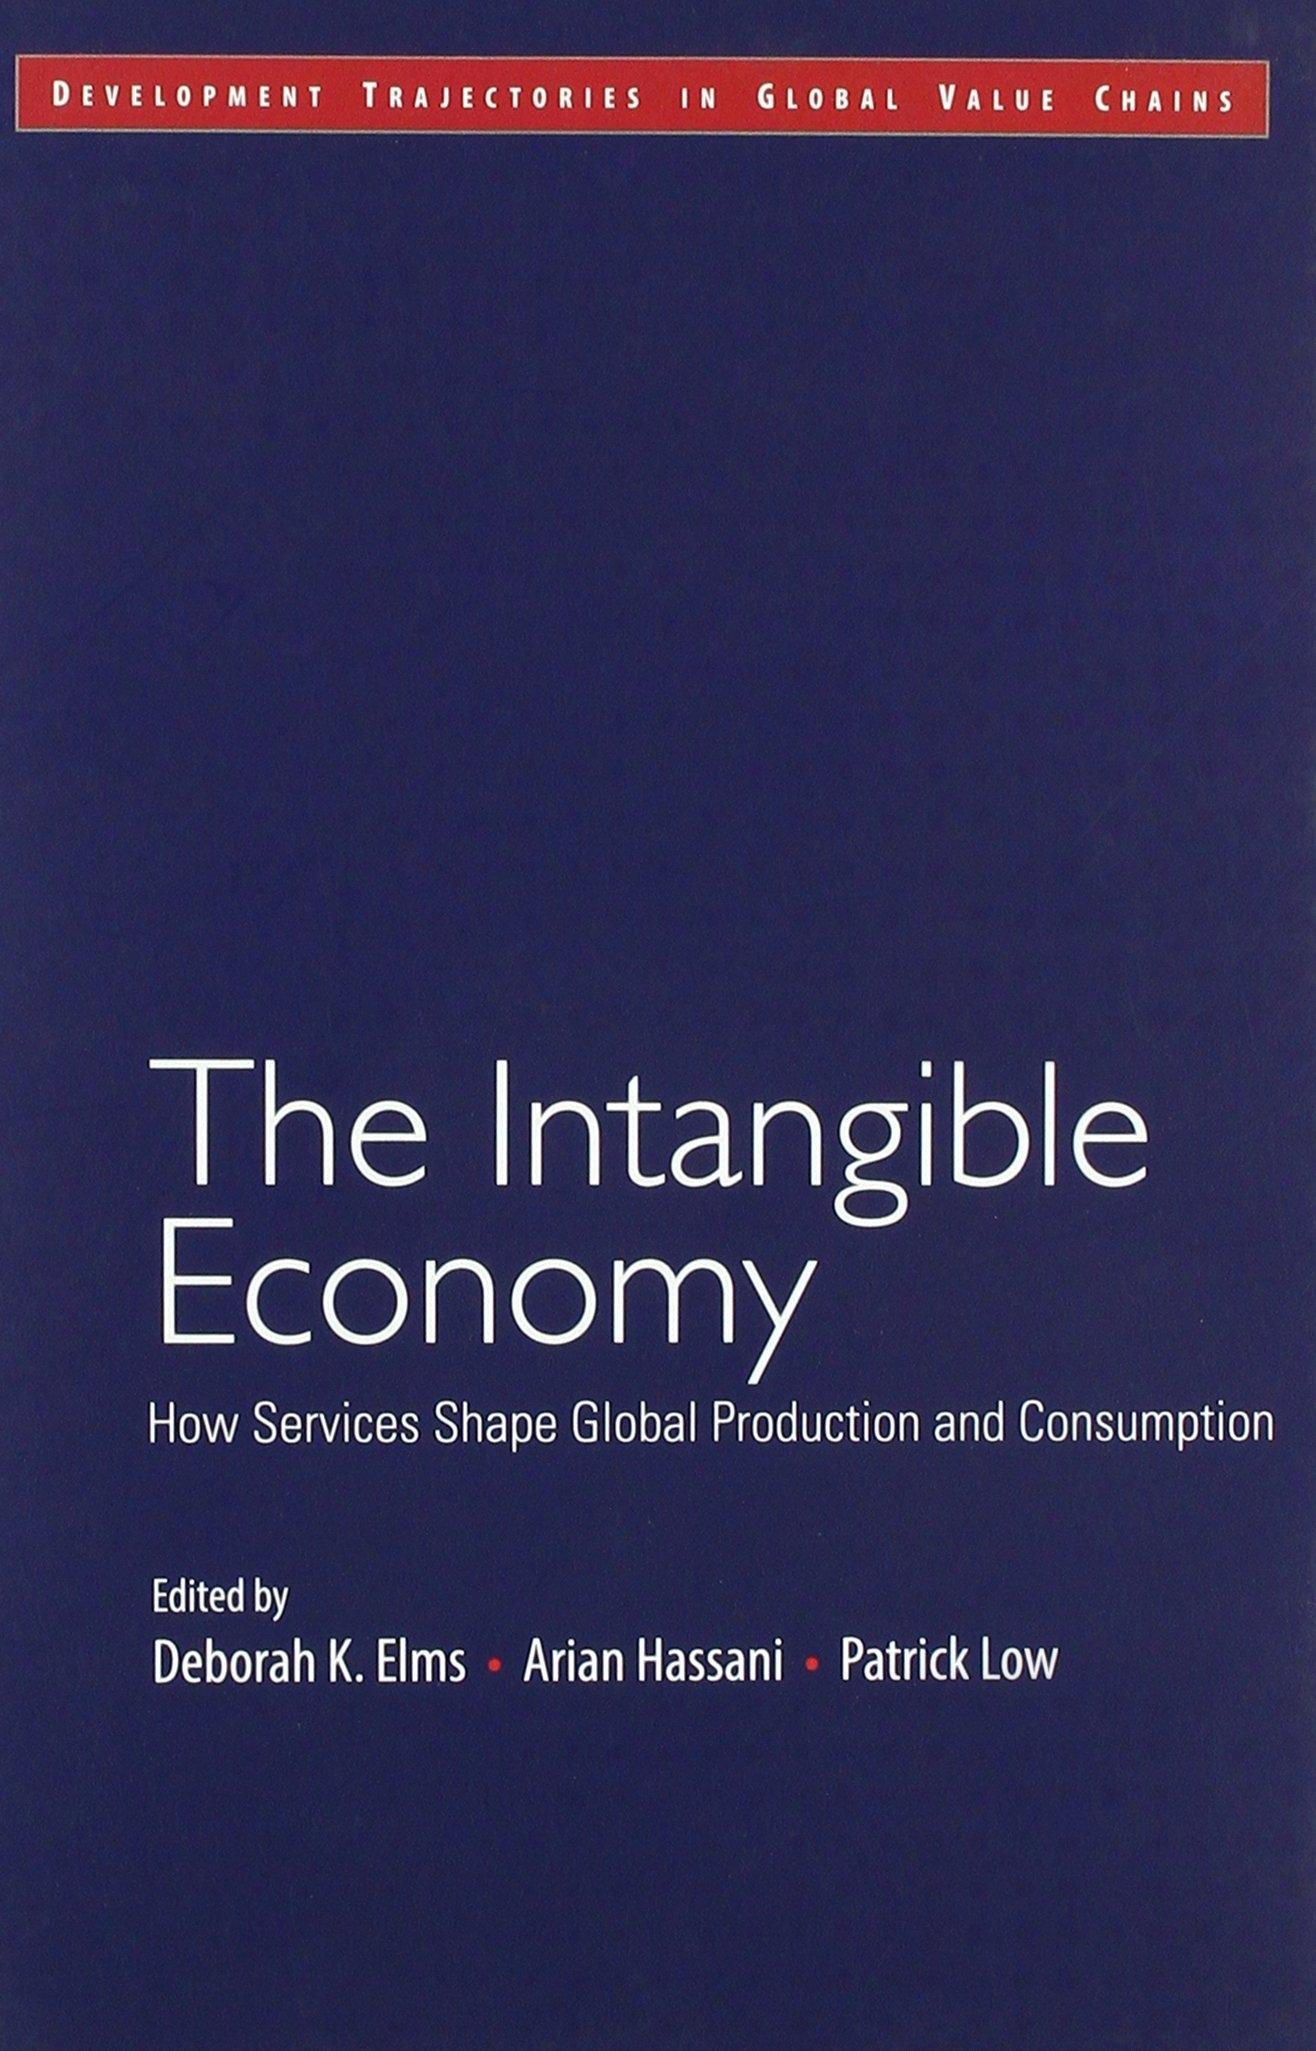 The Intangible Economy "How Services Shape Global Production and Consumption "